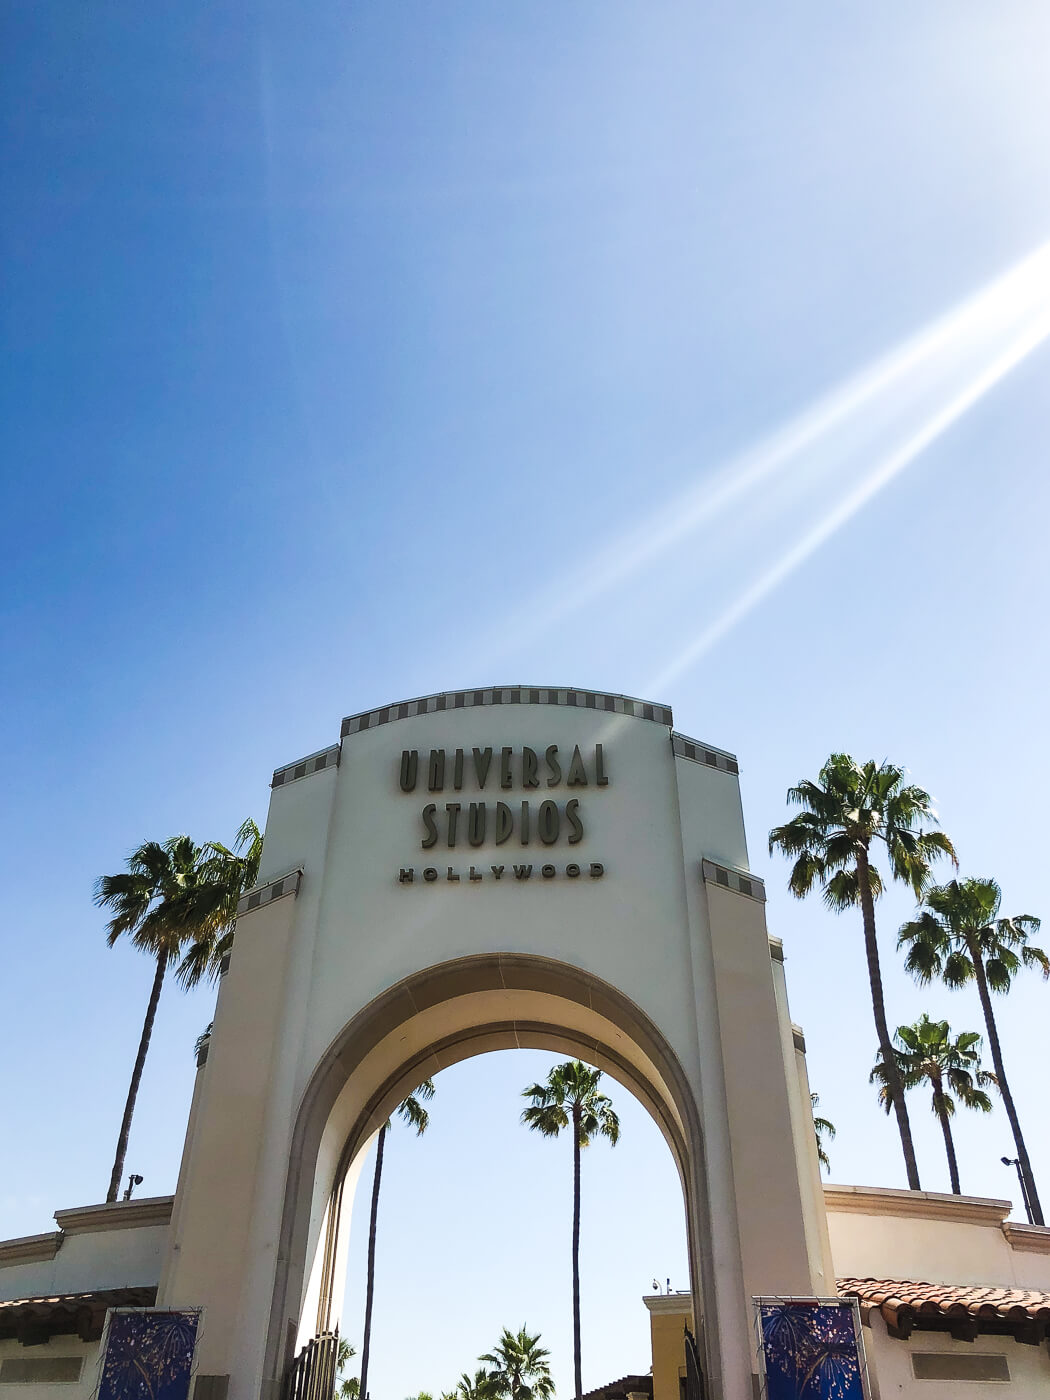 The iconic arched entrance to Universal Studios Hollywood with palm trees in the background. 